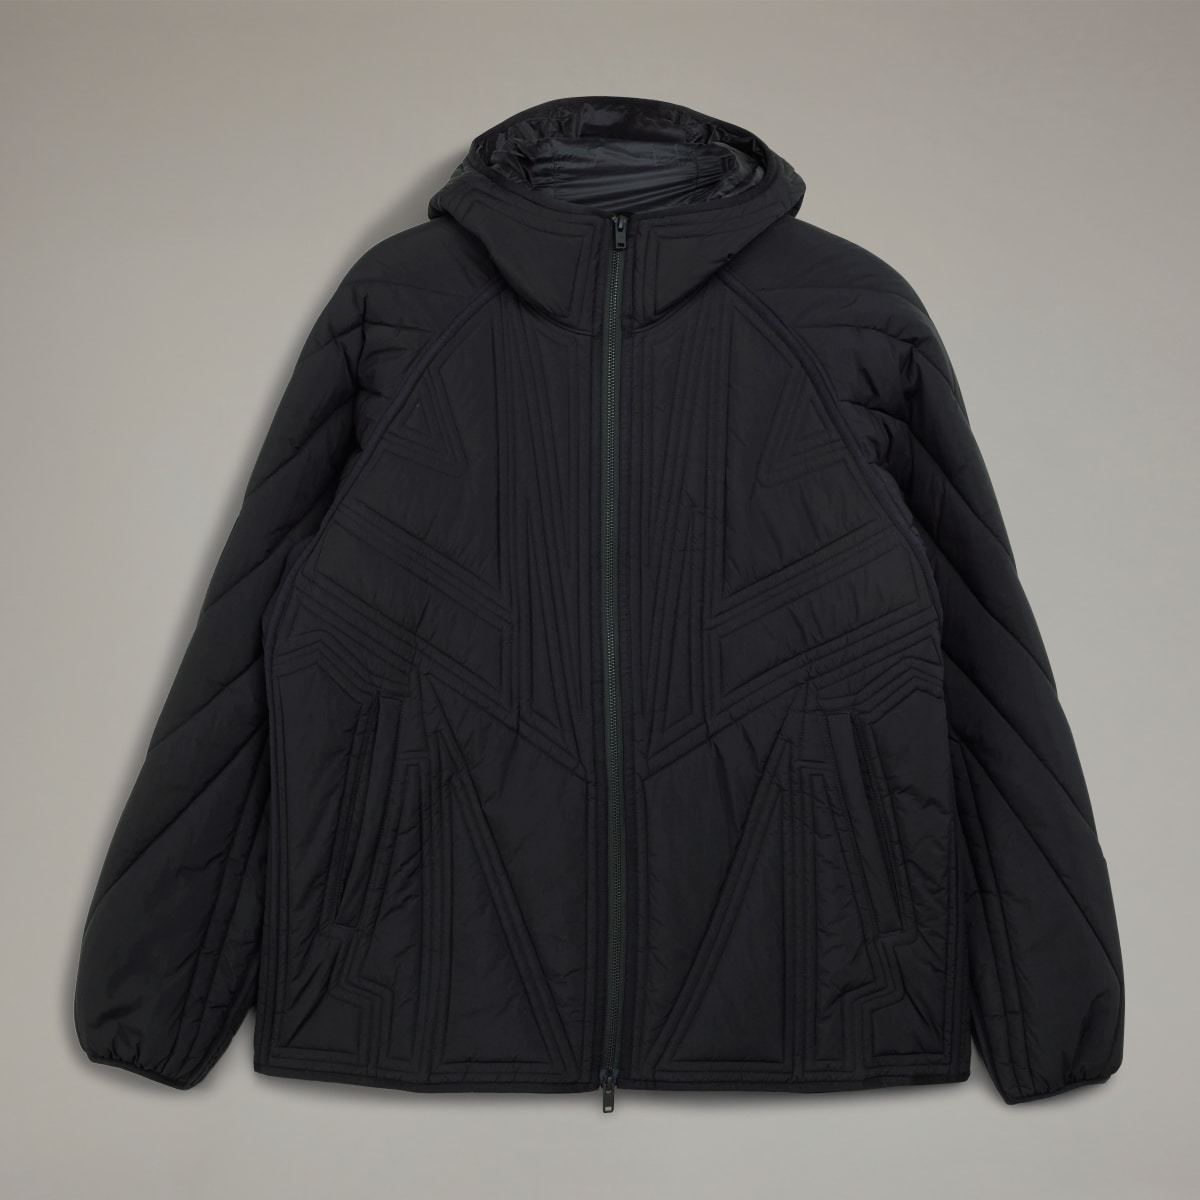 Adidas Y-3 Quilted Jacket. 5